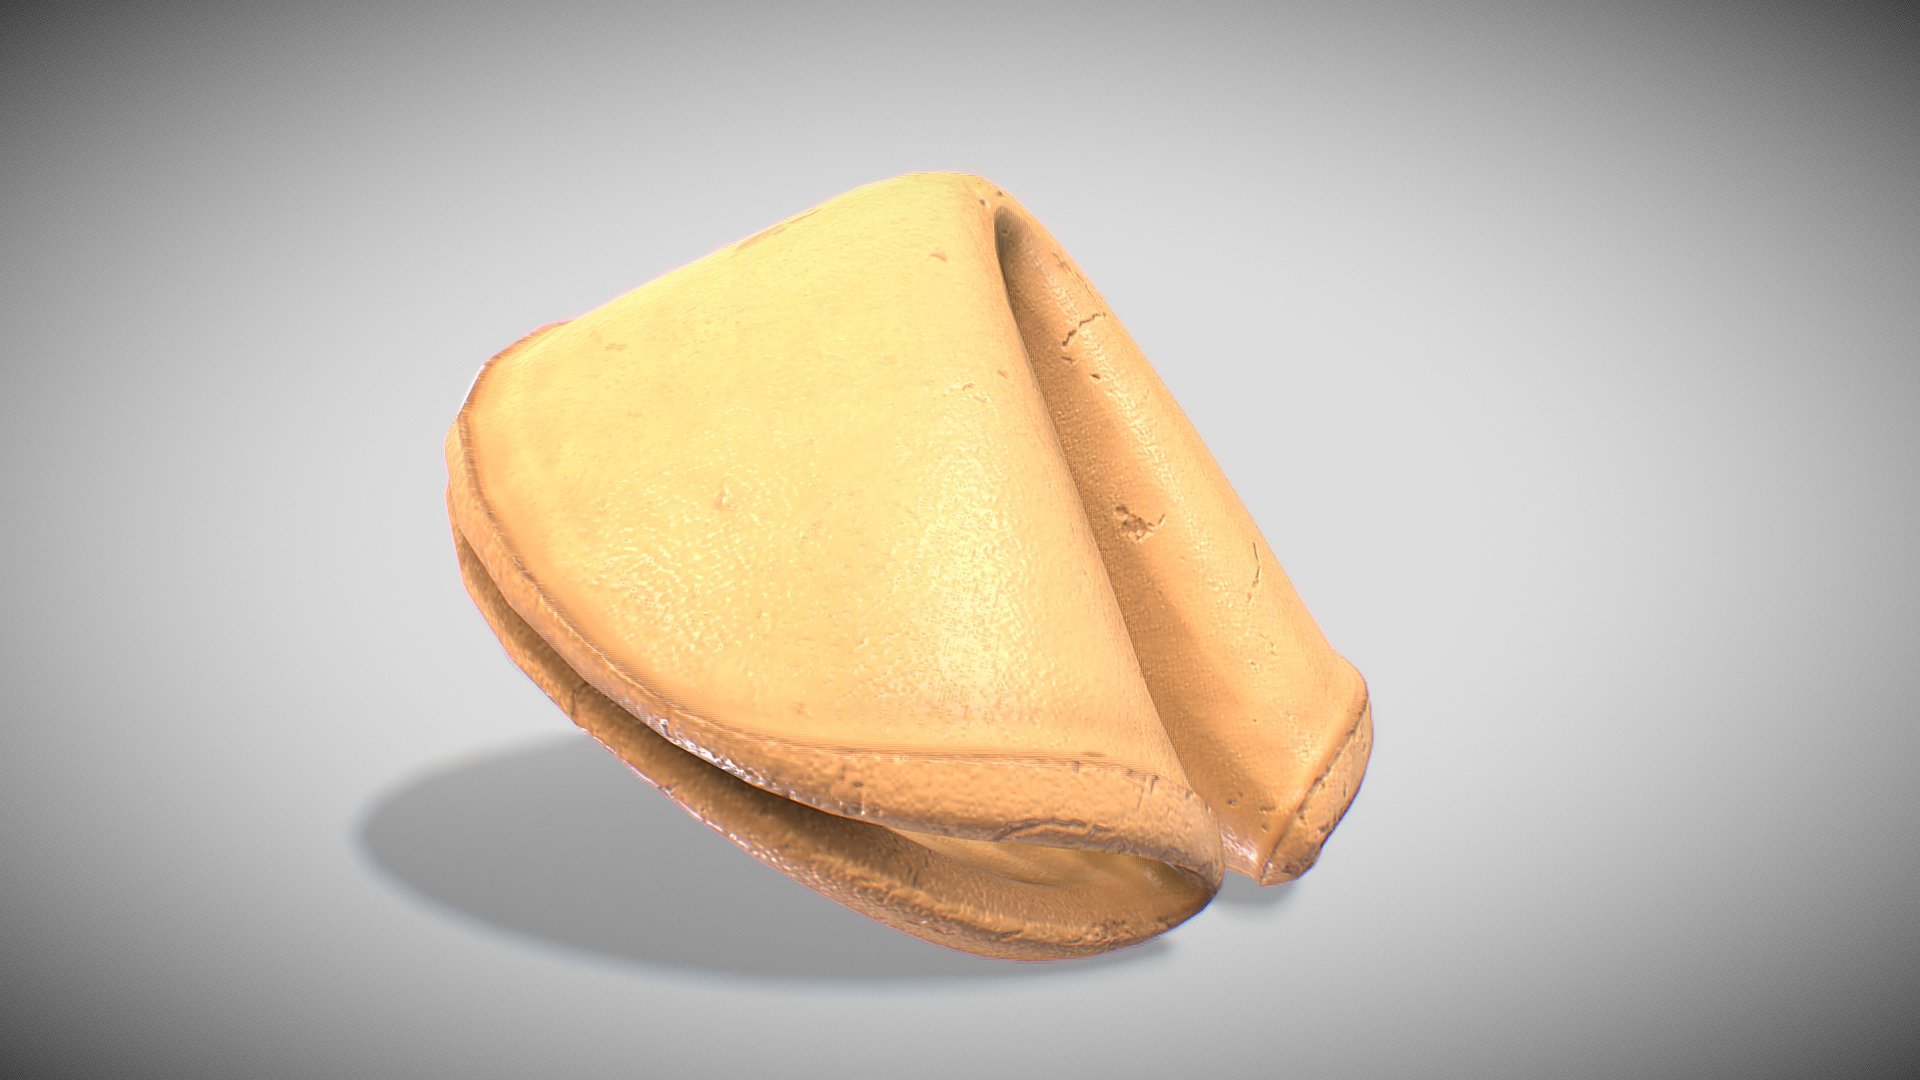 Here is a model of a Fortune Cookie. The cookie was made in blender, and the textures were baked in substance painter 3d model